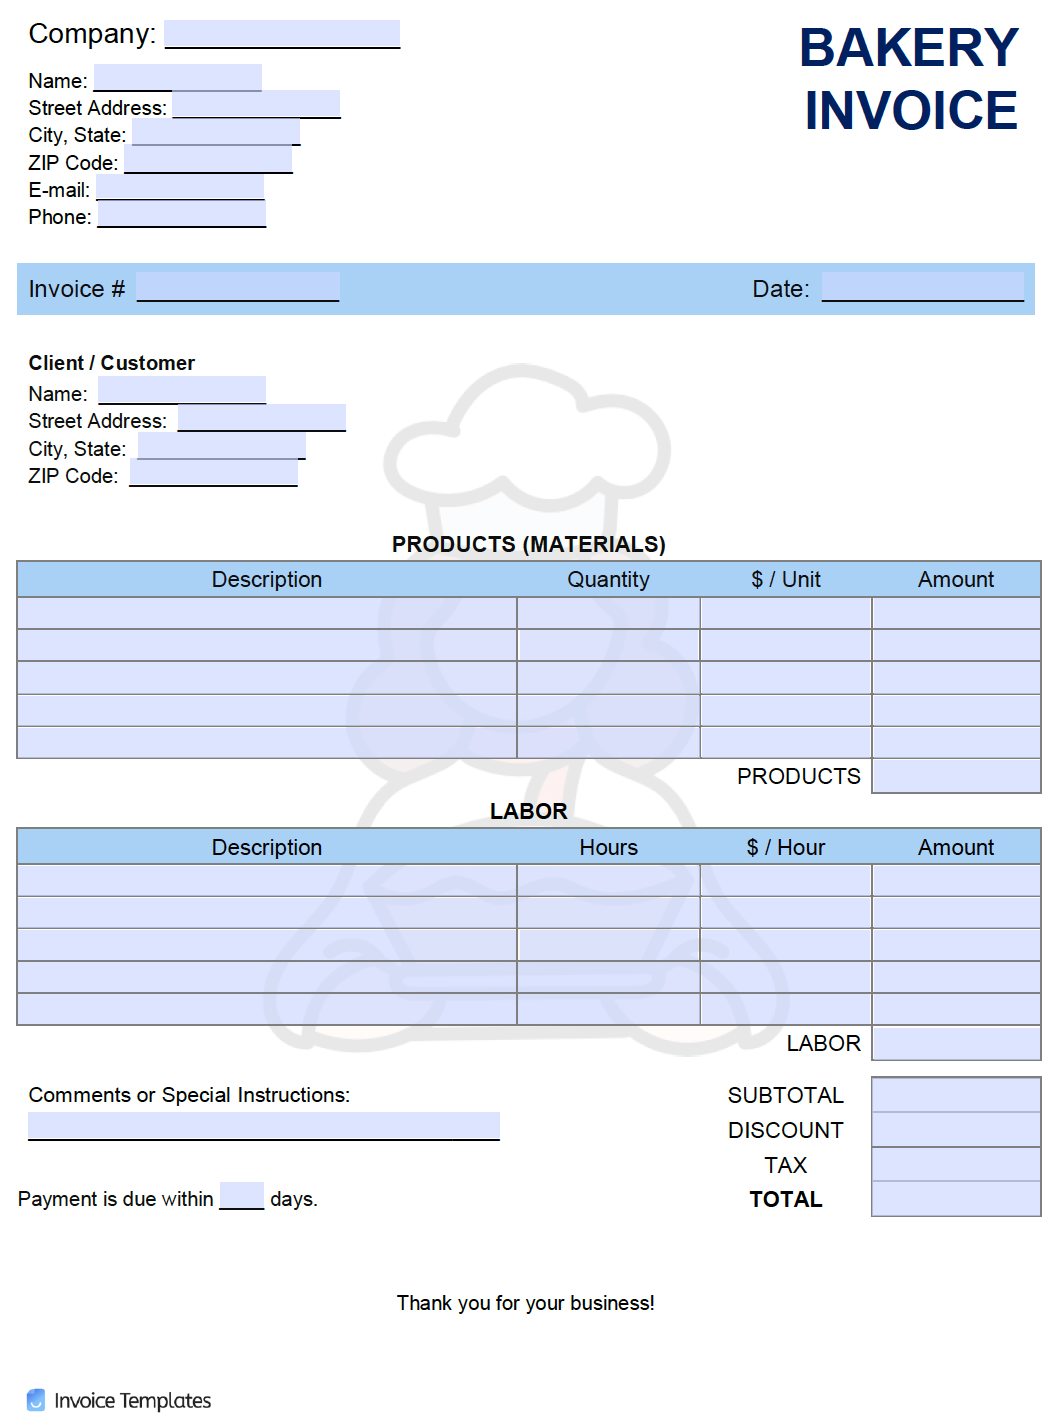 Free Bakery Invoice Template Word Printable Form Templates And Letter